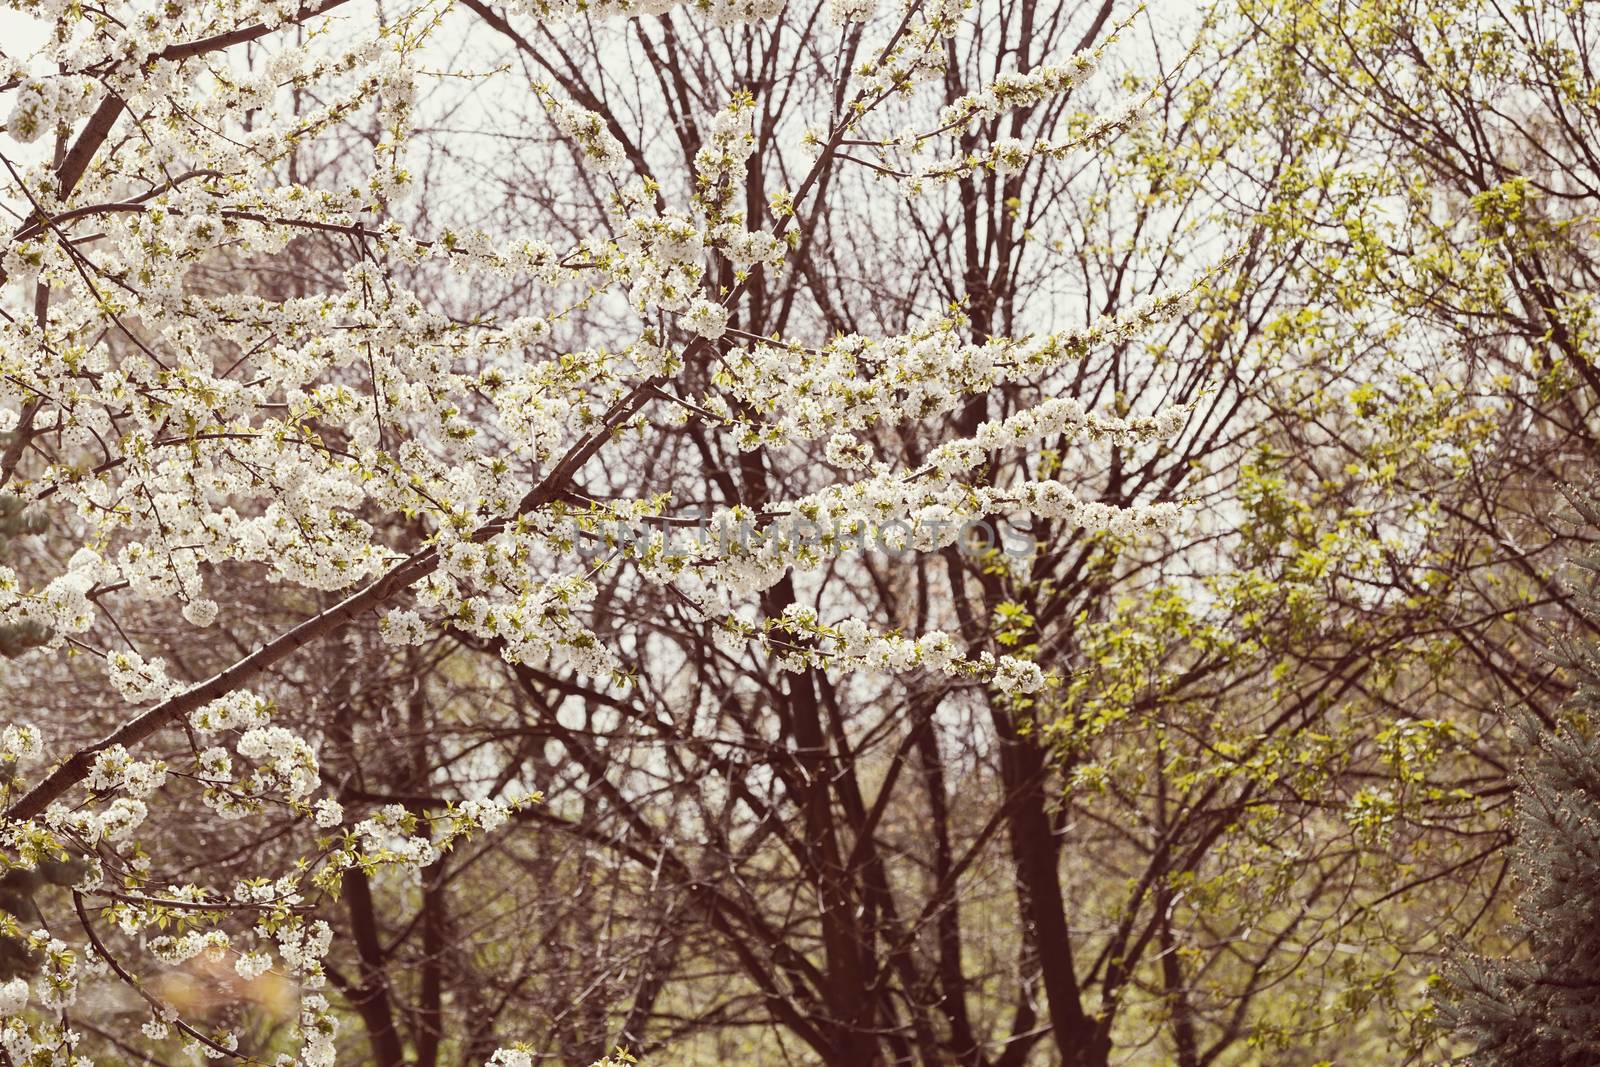 tree with white flowers in the spring, note shallow dept of field